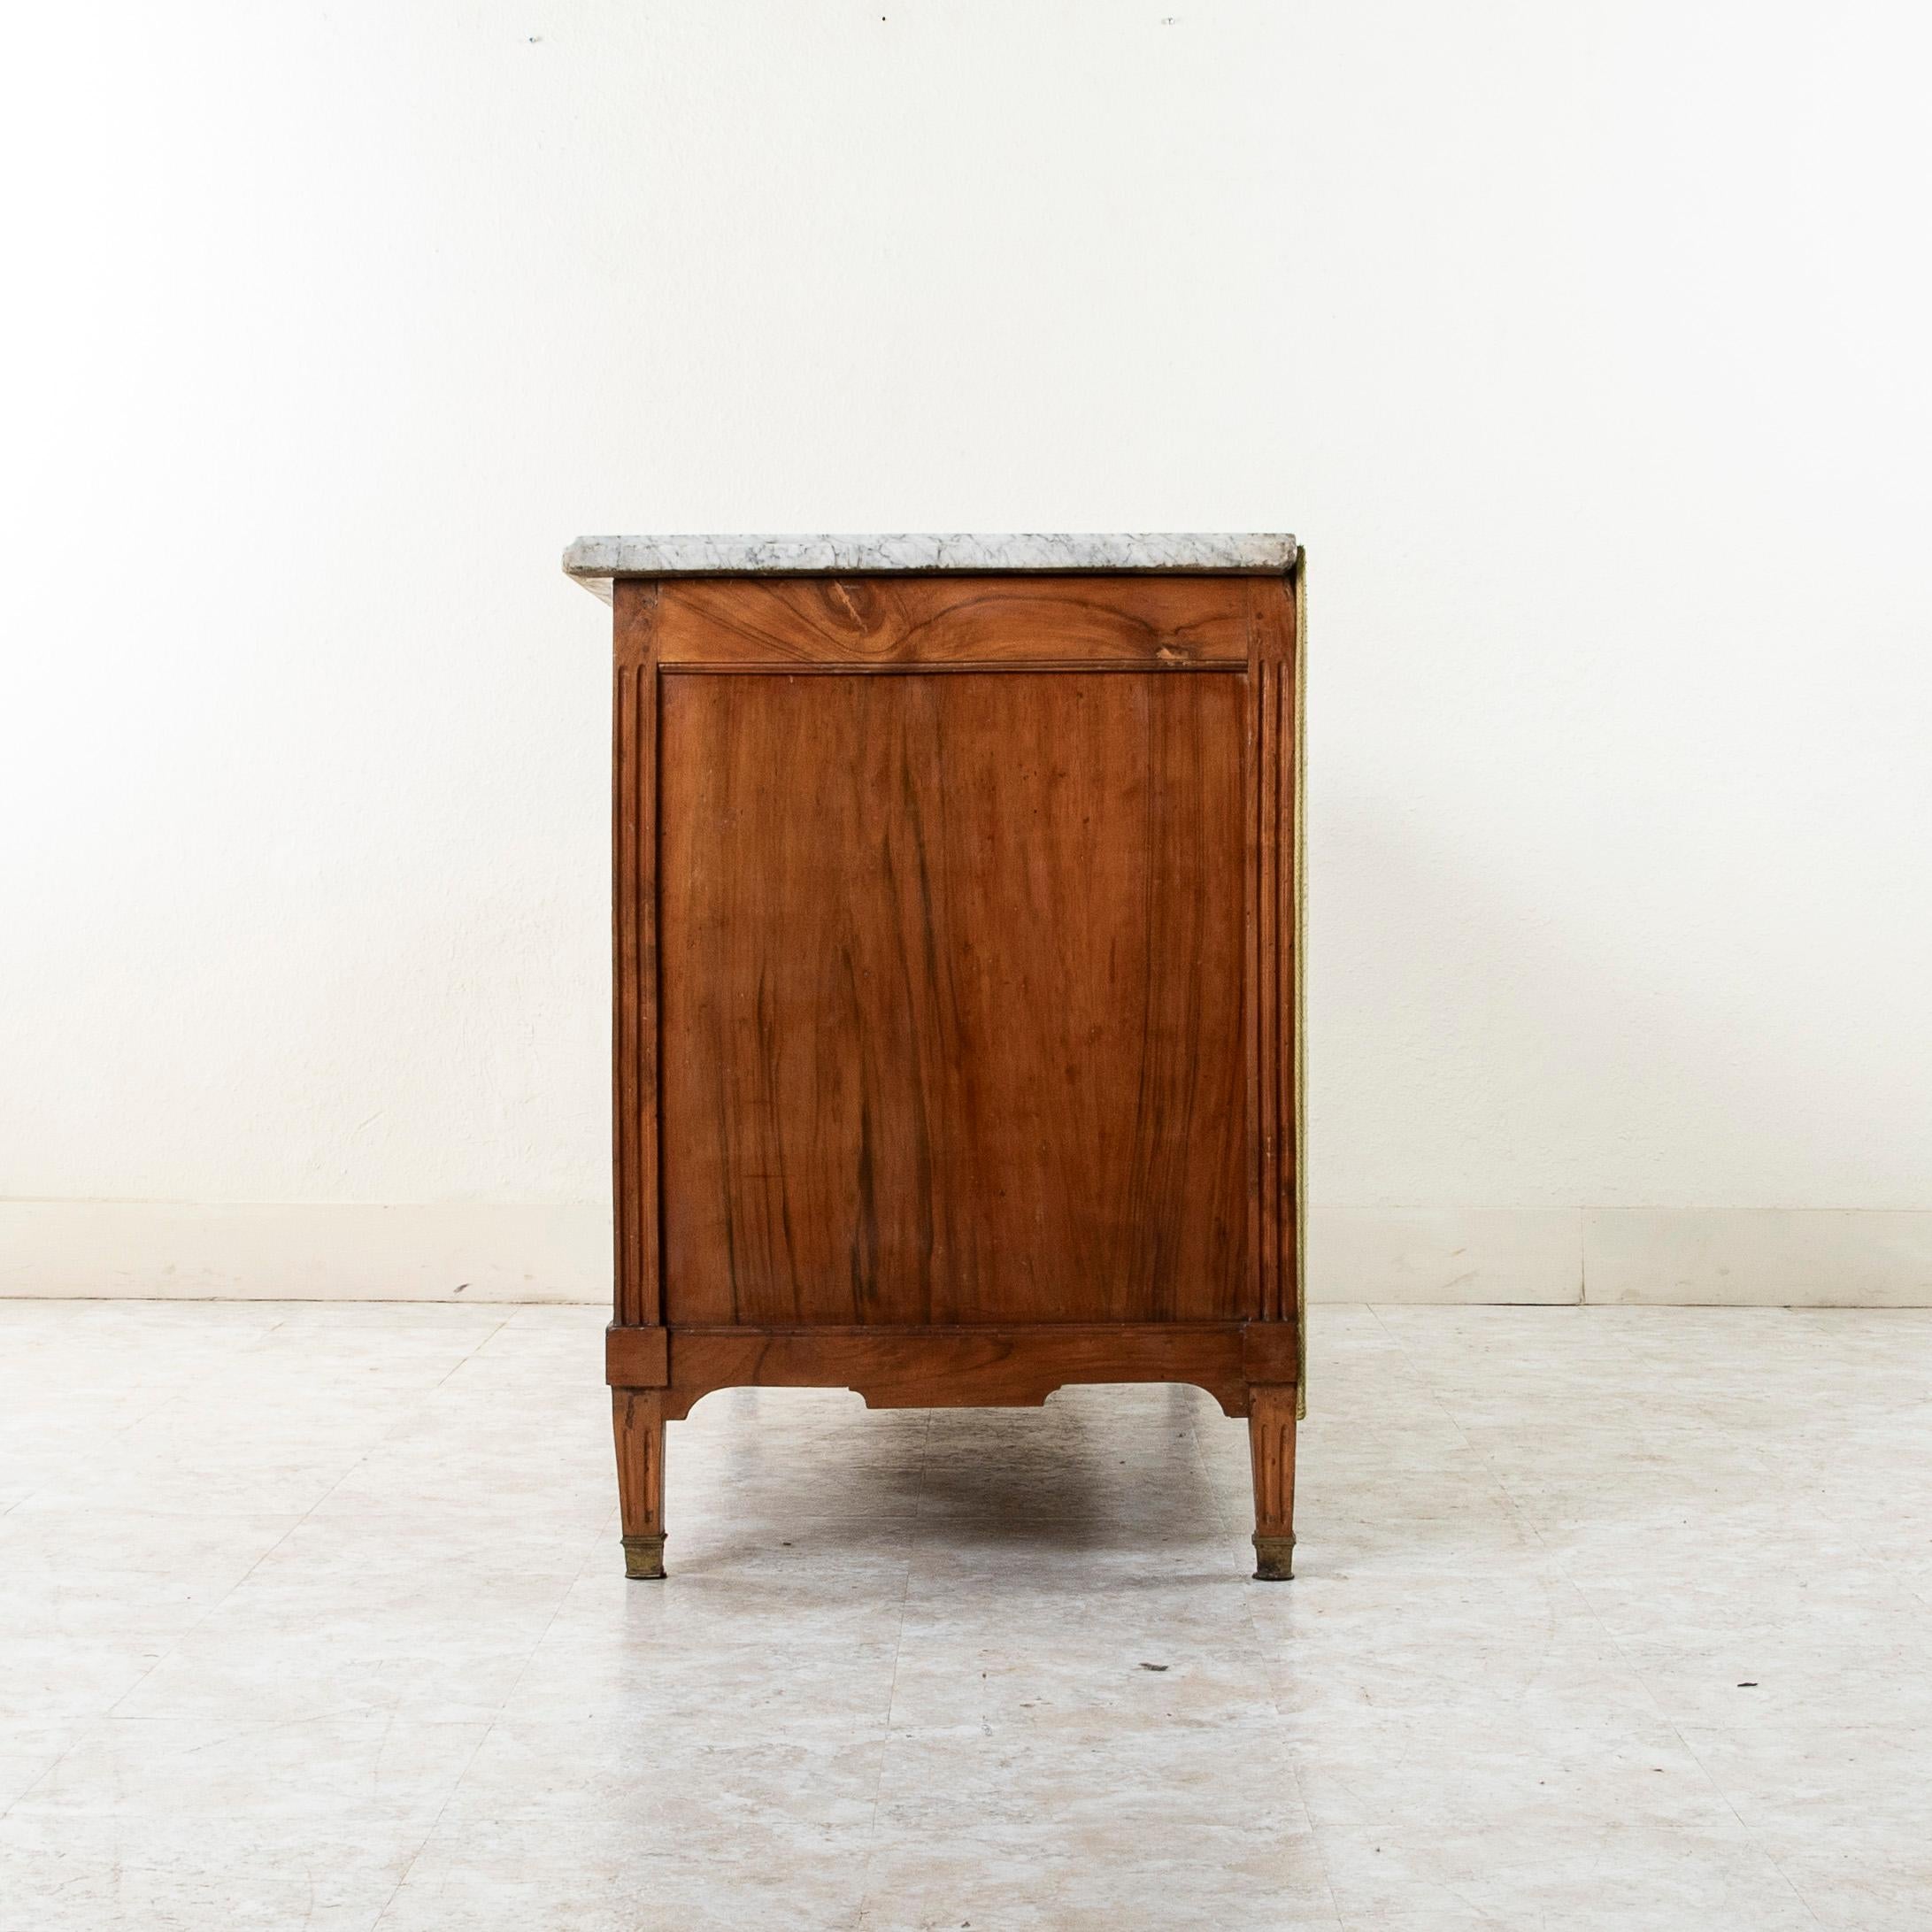 Late 18th Century French Louis XVI Period Walnut and Marble Hunt Buffet For Sale 2